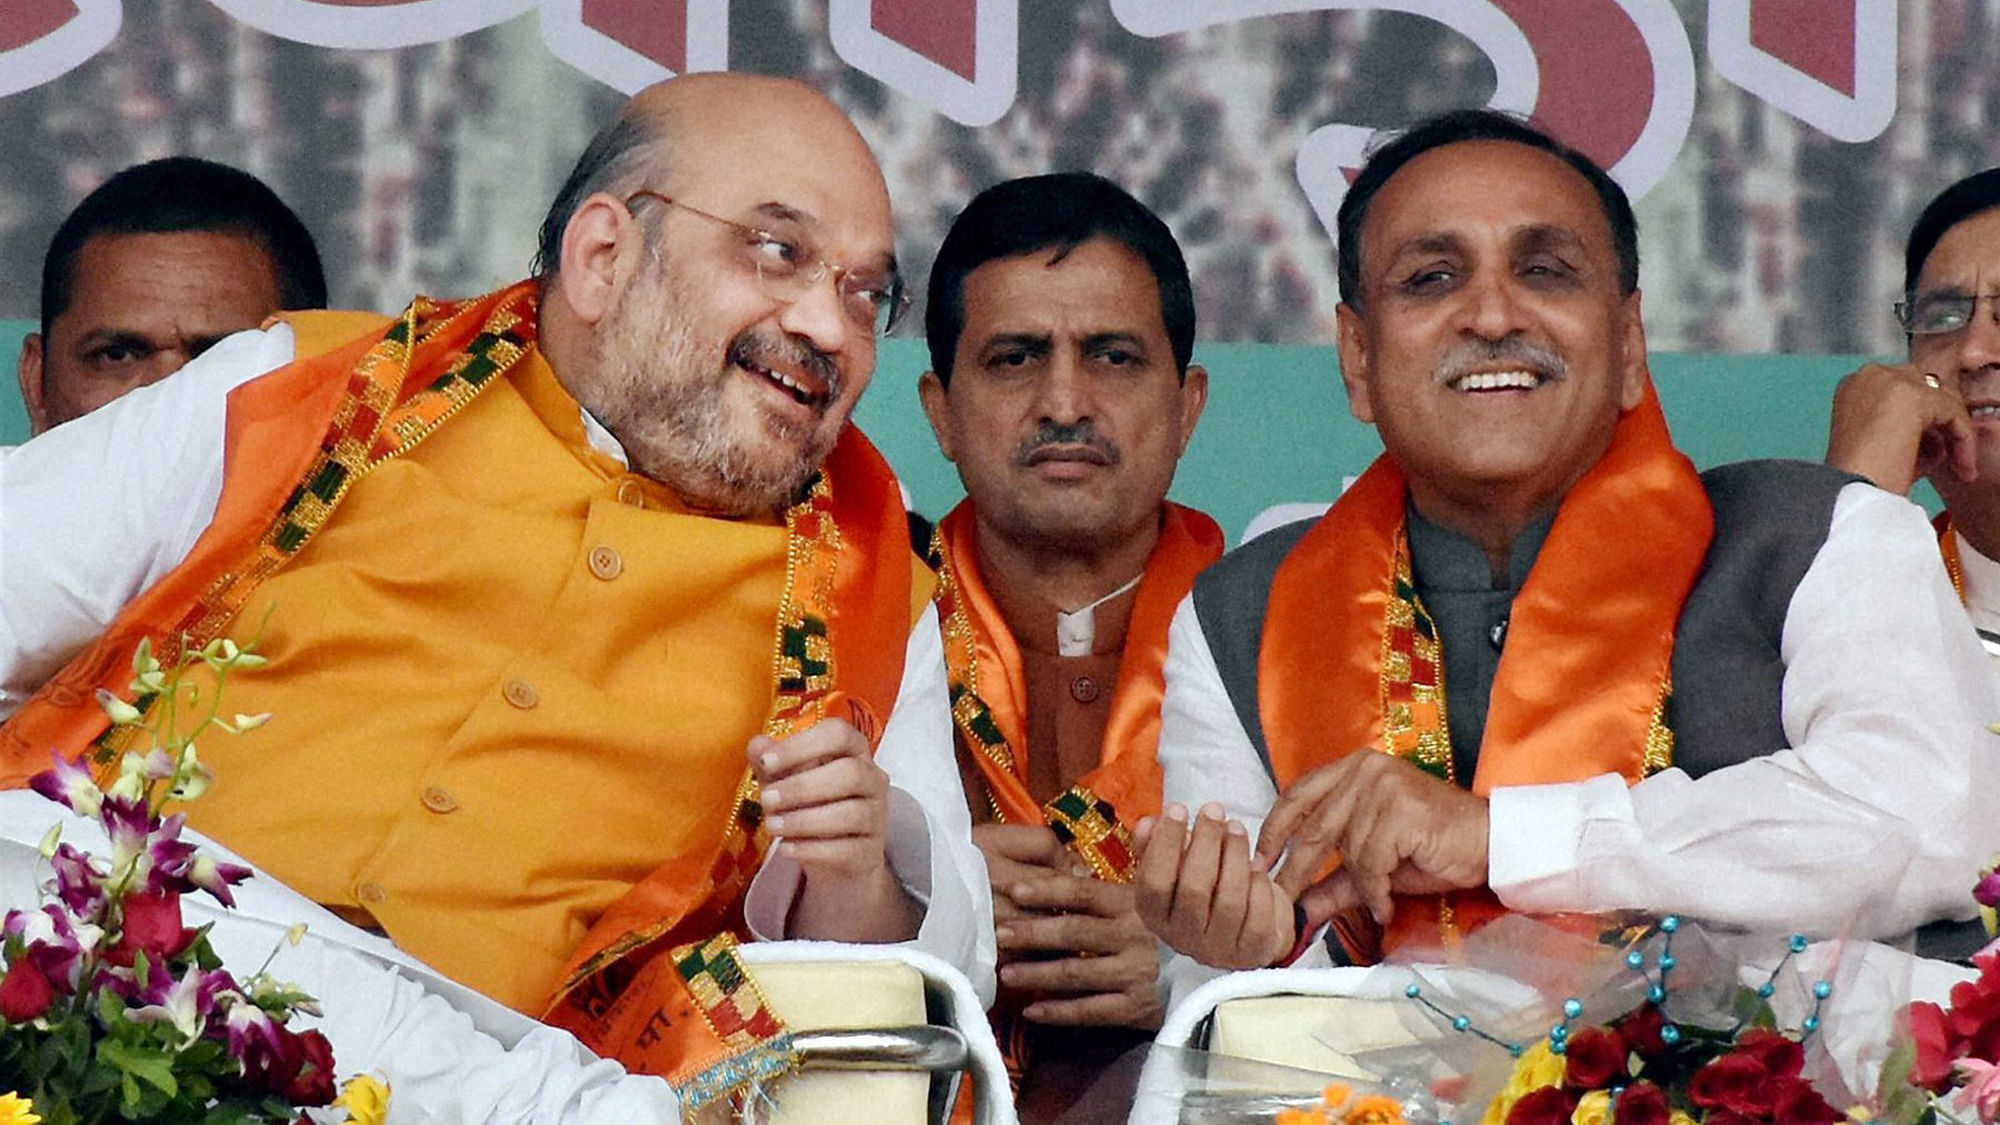 File photo of Vijay Rupani with BJP President Amit Shah in Surat. Rupani was on Friday chosen by the Gujarat BJP as the State’s next Chief Minister. (Photo: PTI)